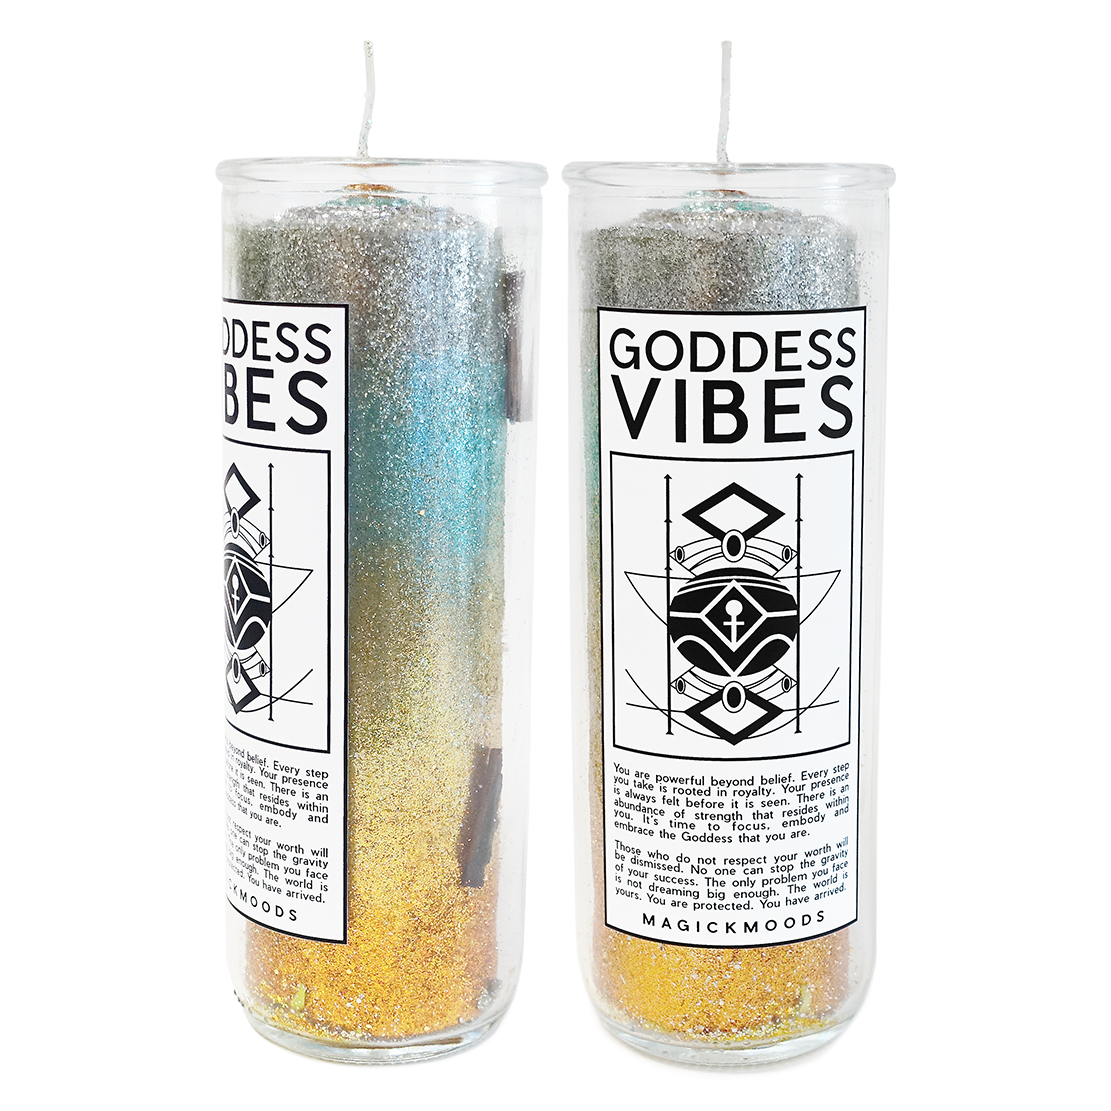 Goddess Vibes 7-Day Meditation Candle - PREORDER - Ships by July 28th, 2023